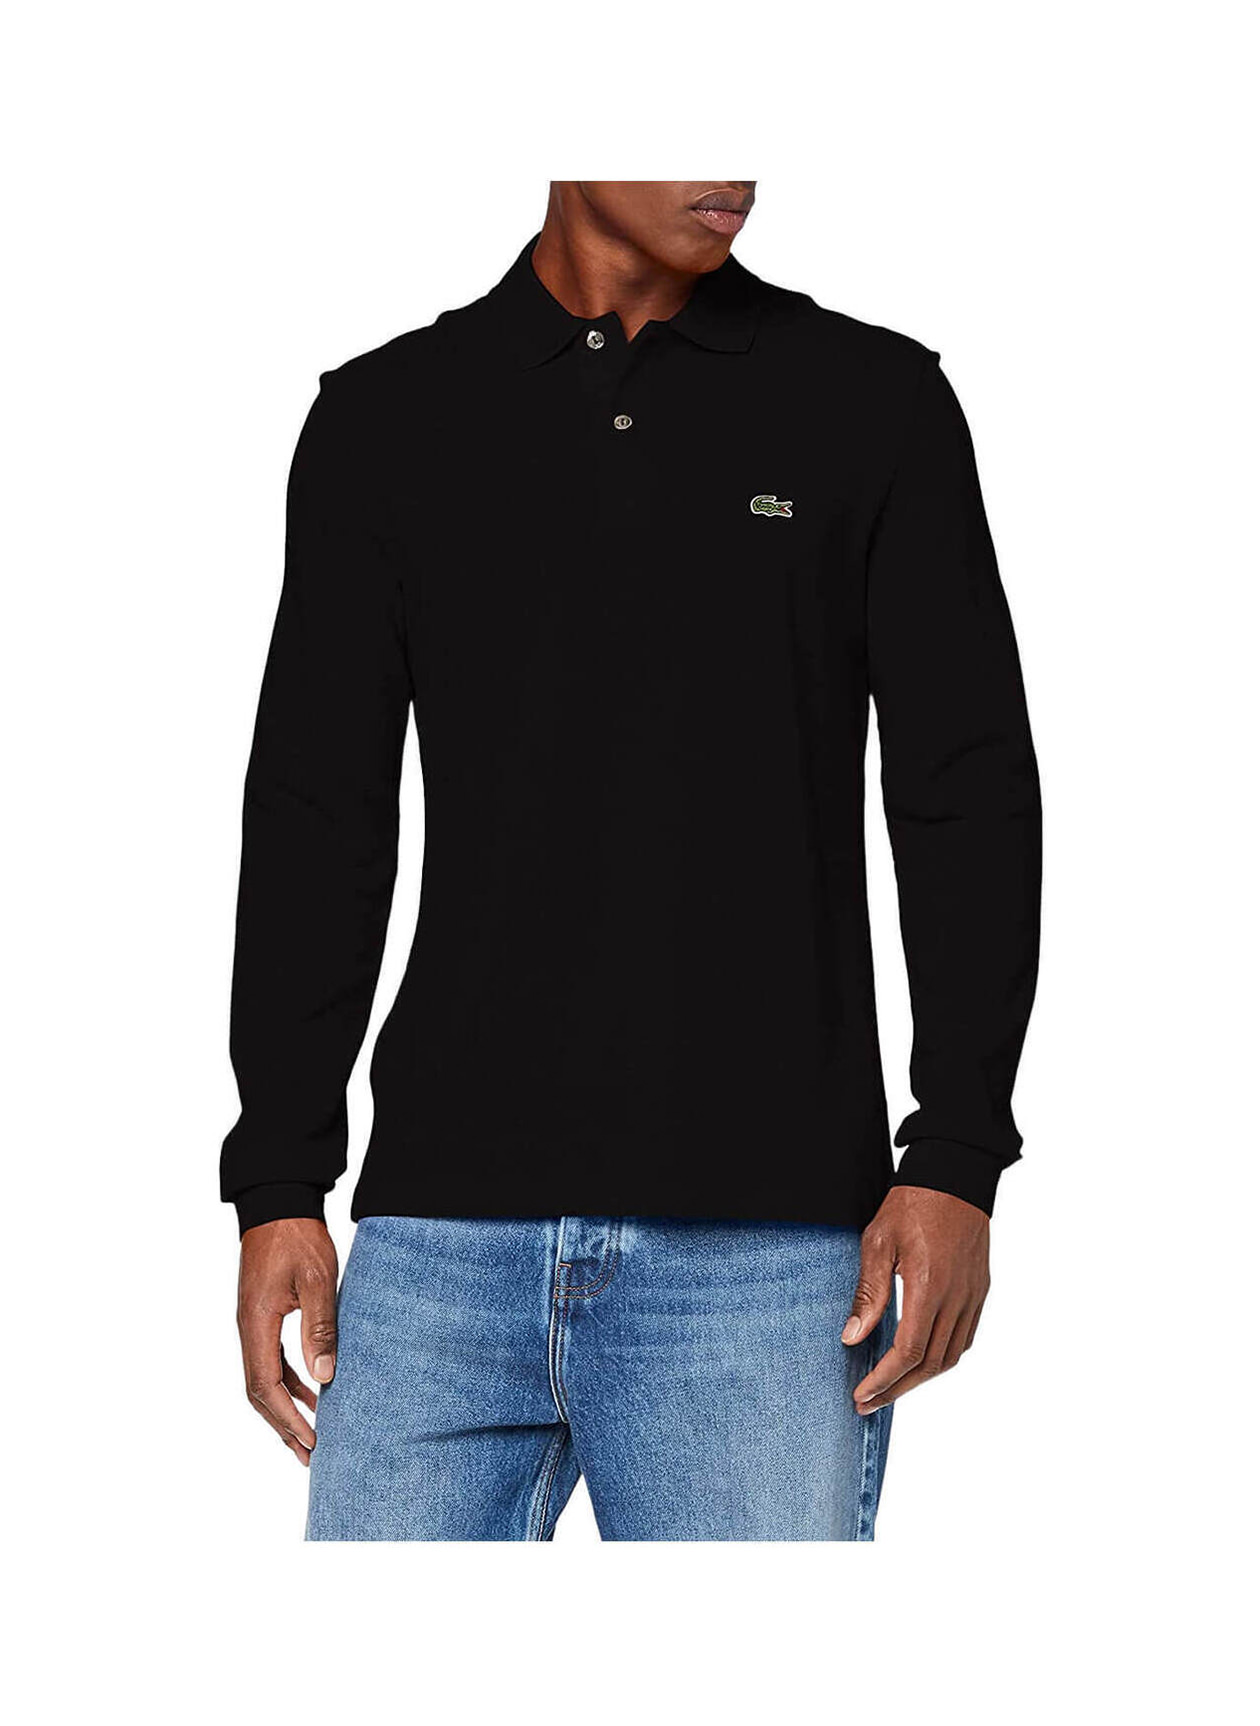 Seaboard mængde af salg leninismen Lacoste Men's Classic Long-Sleeve Pique Polo | Lacoste Custom Embroidered Polo  Shirts